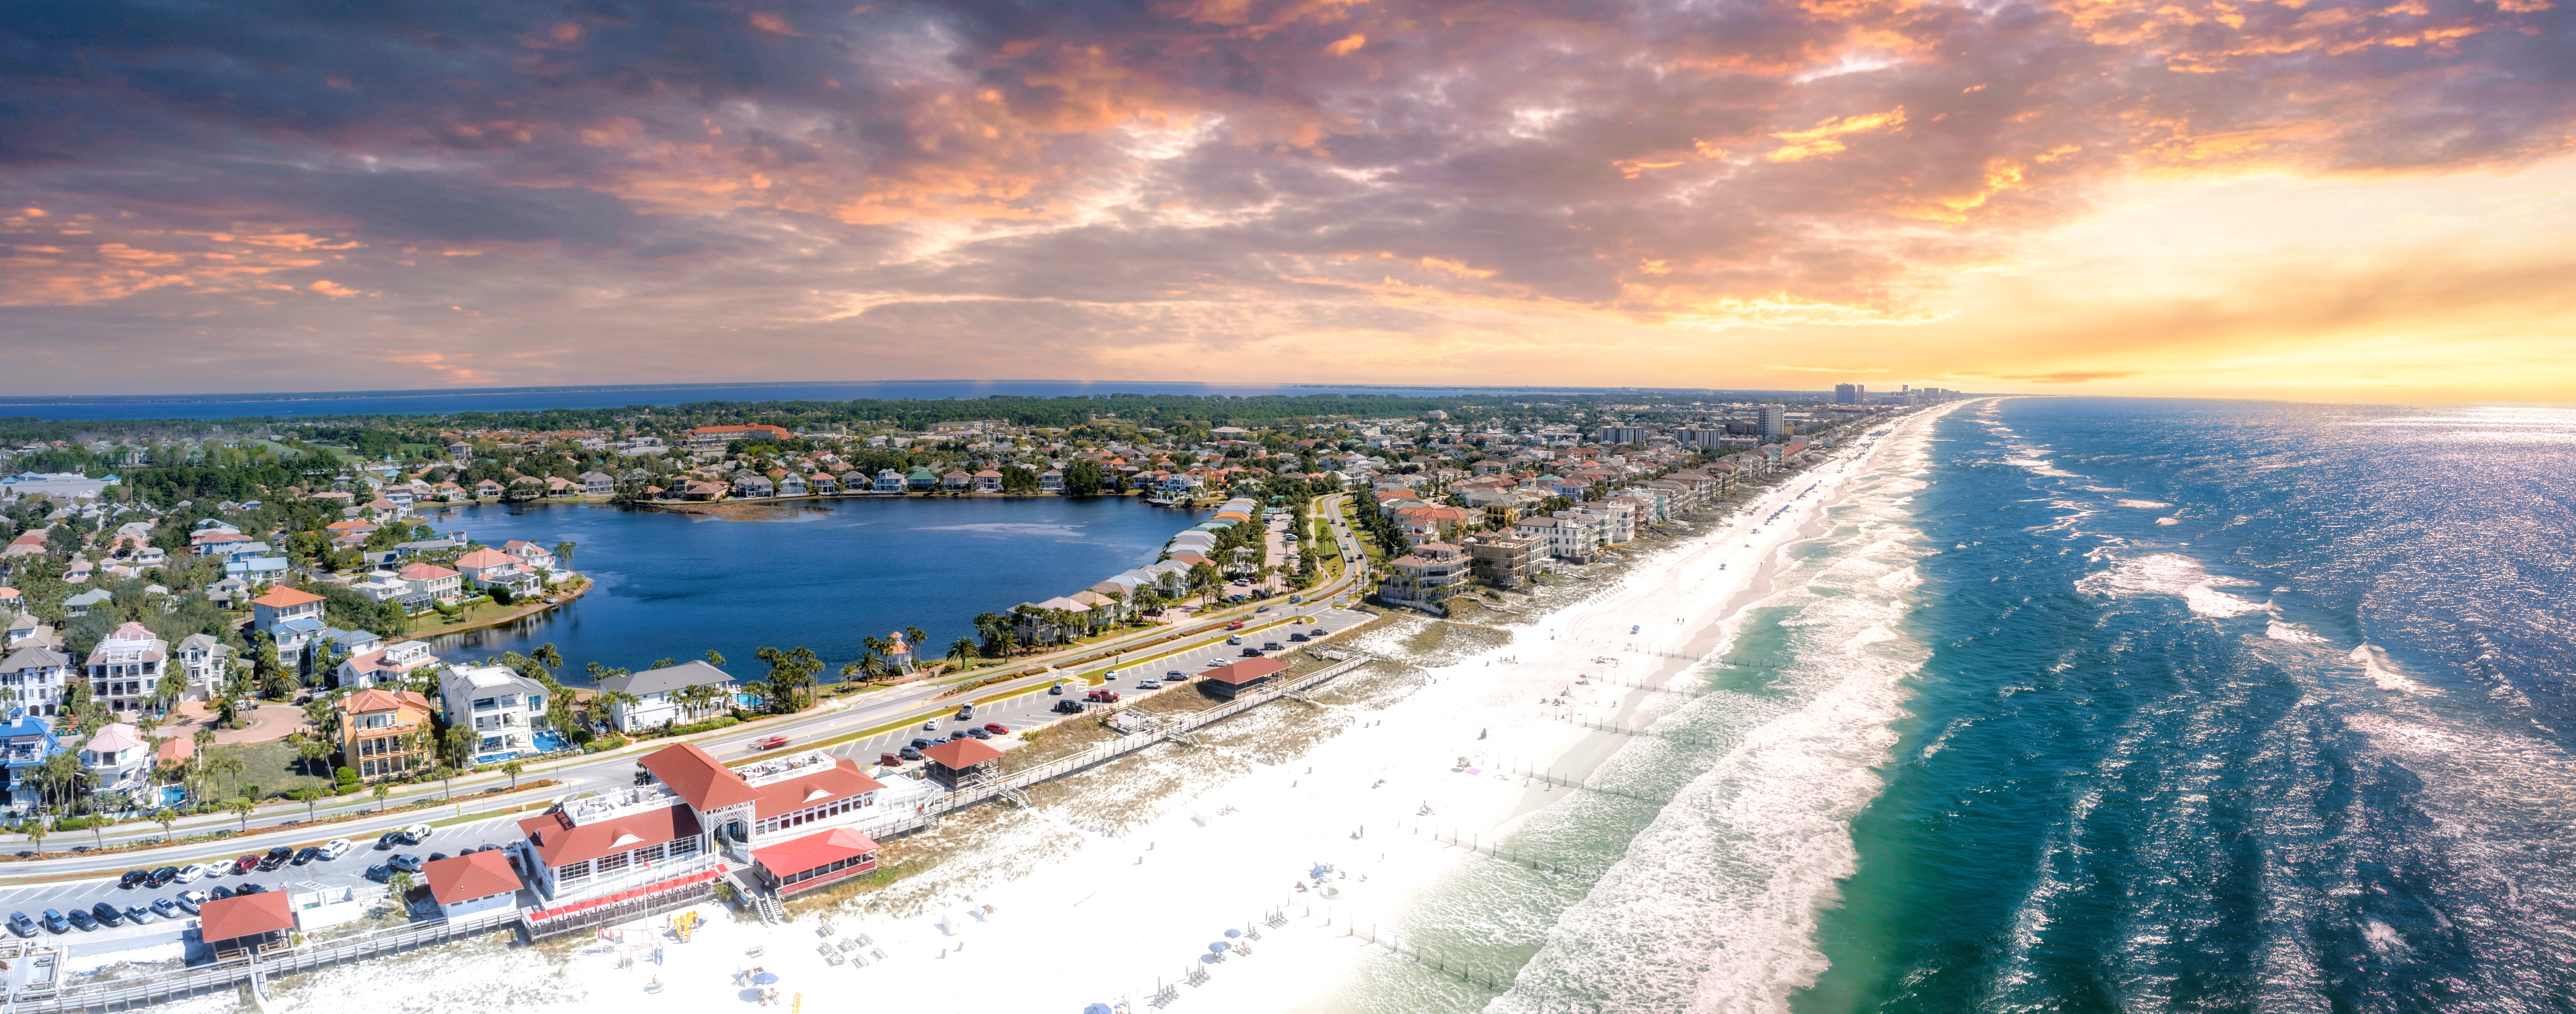 spend the christmas holidays in Destin, Florida